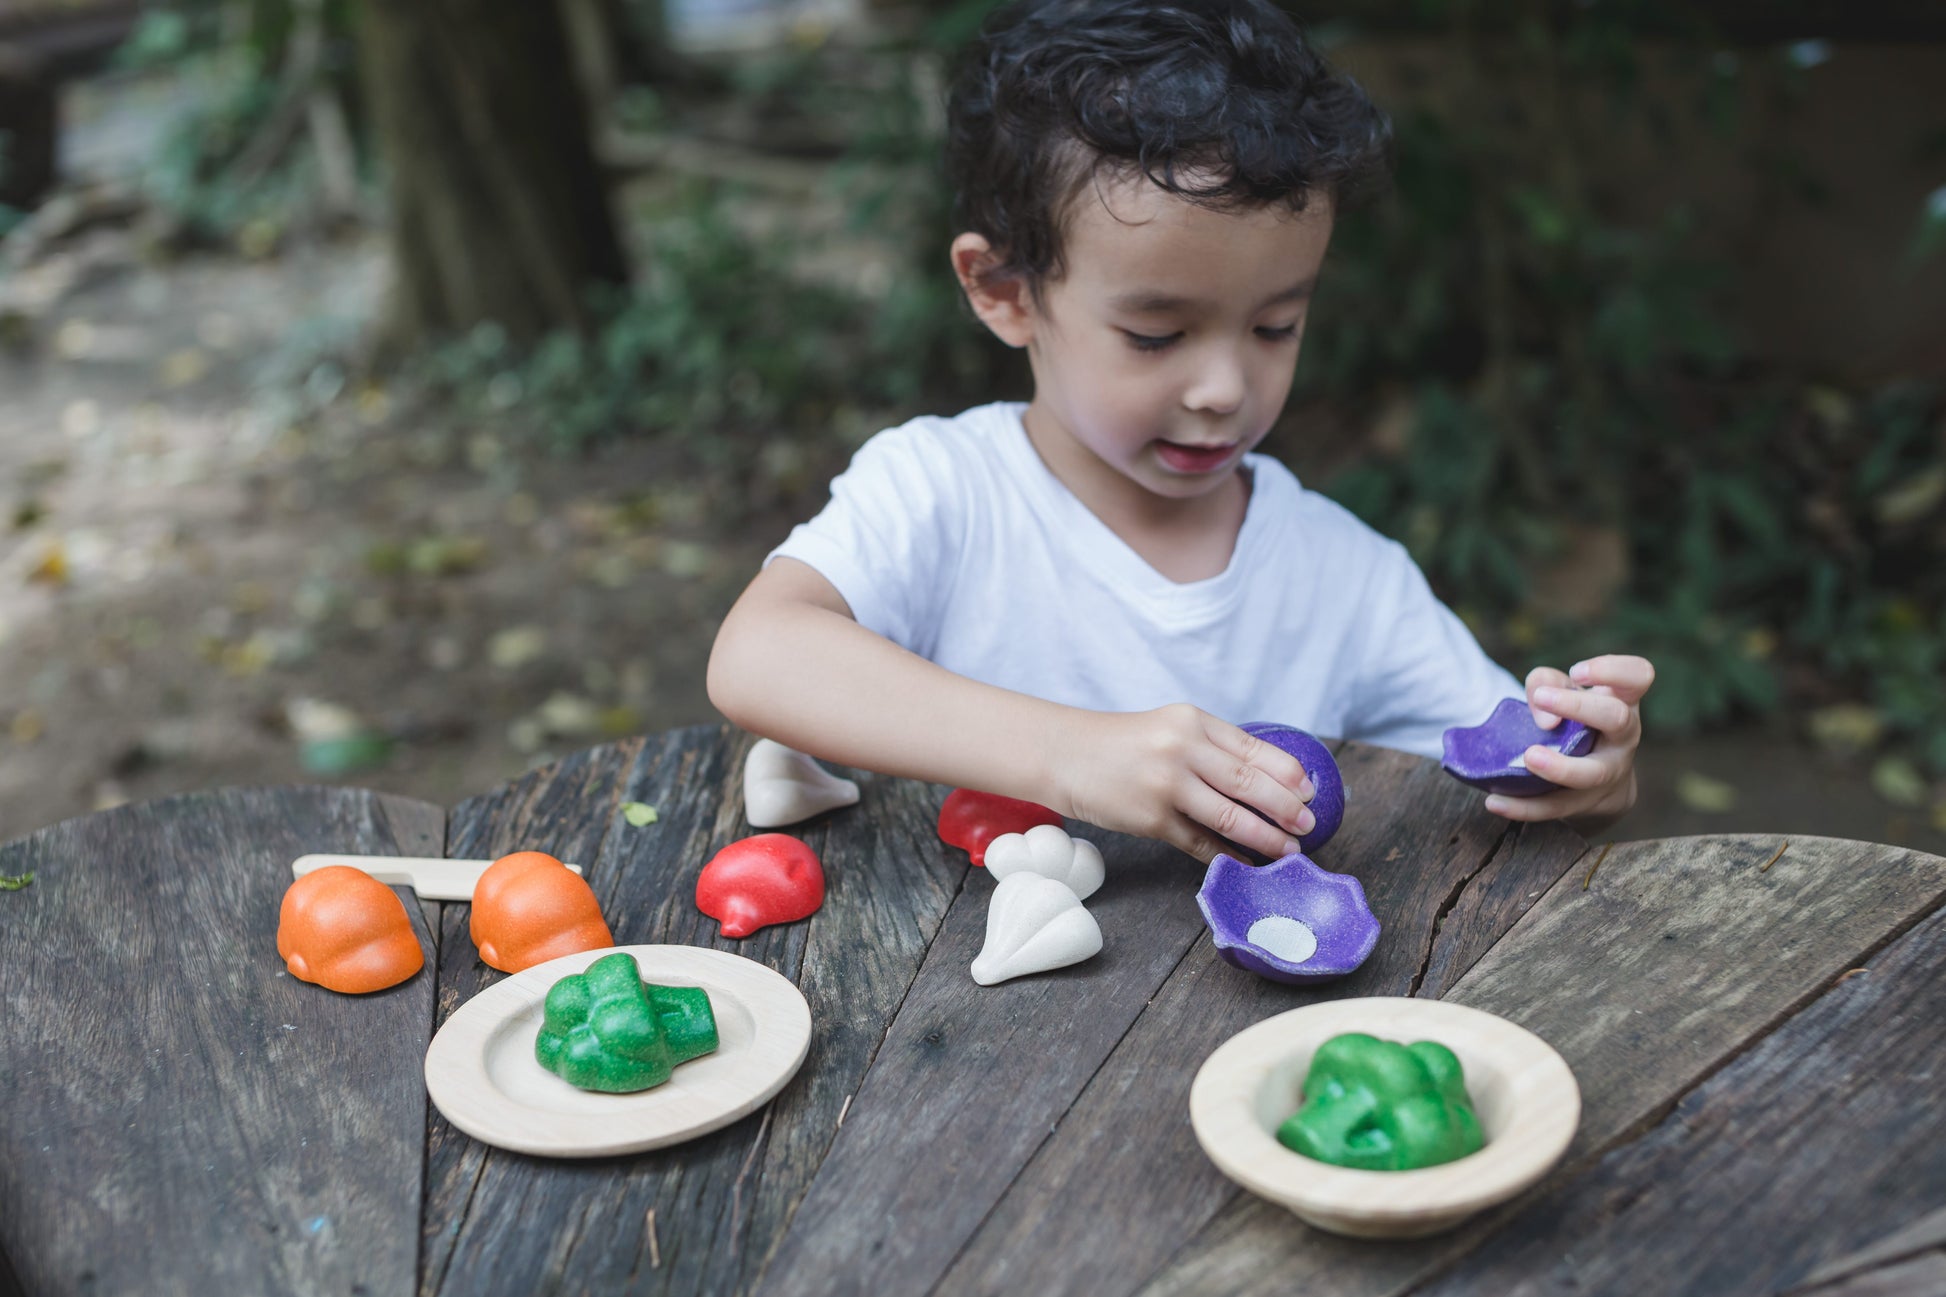 A child playing with a wooden vegetable set on a wood table outdoors. the child has set the two halves of the broccoli on two wooden plates